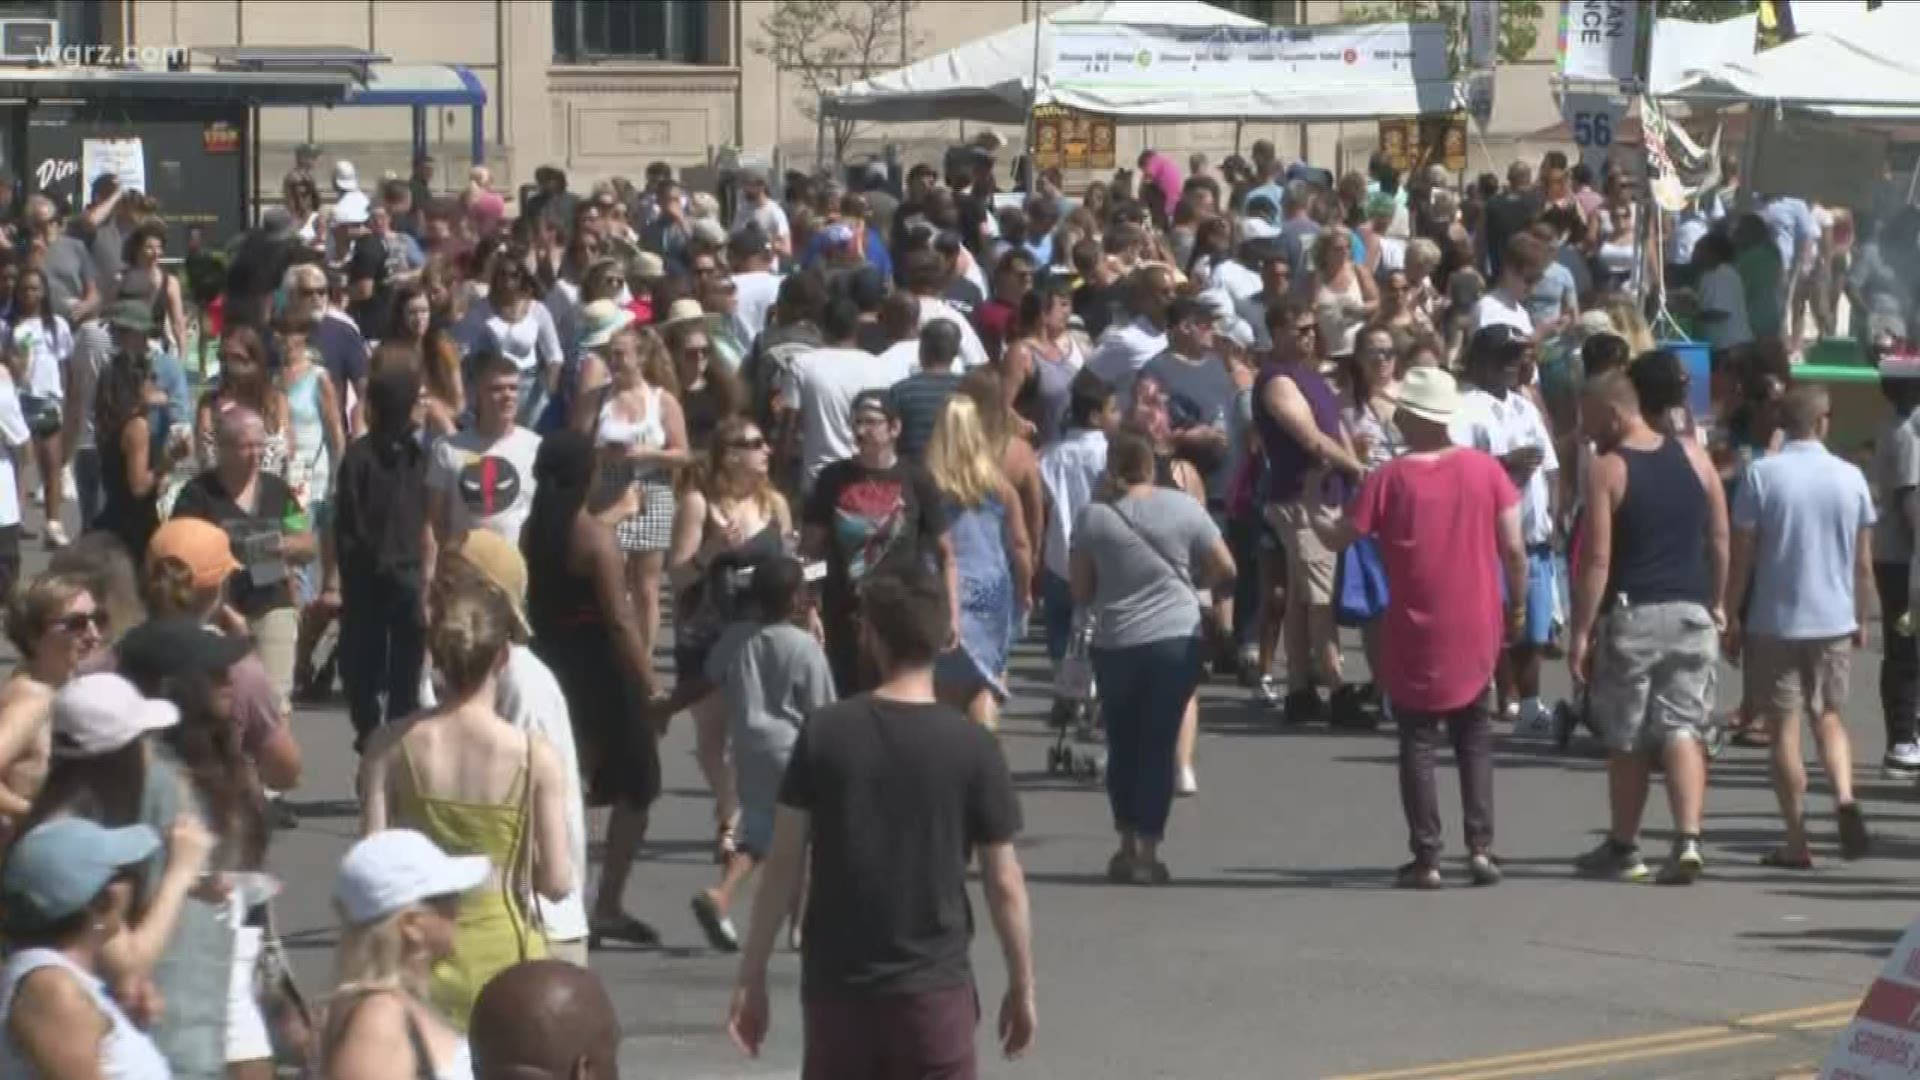 Here's what you need to know about the Italian Festival in Buffalo this